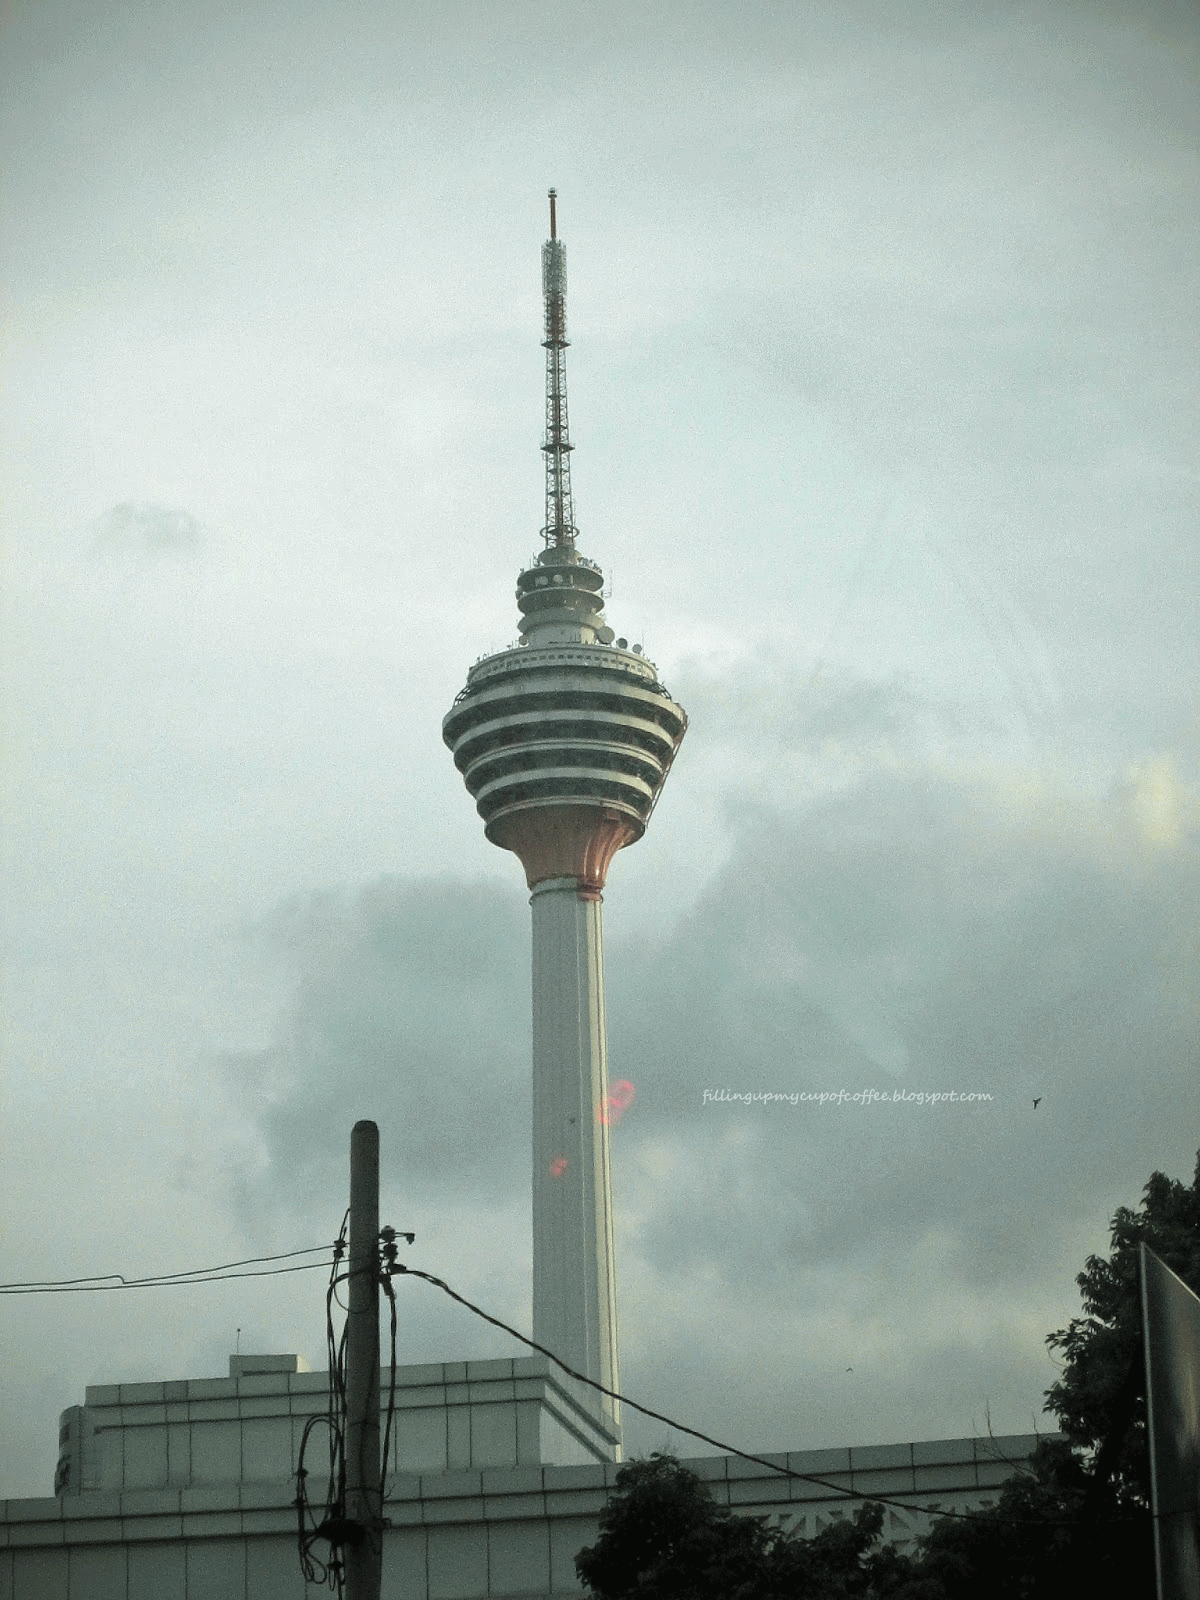 KL Tower Photo